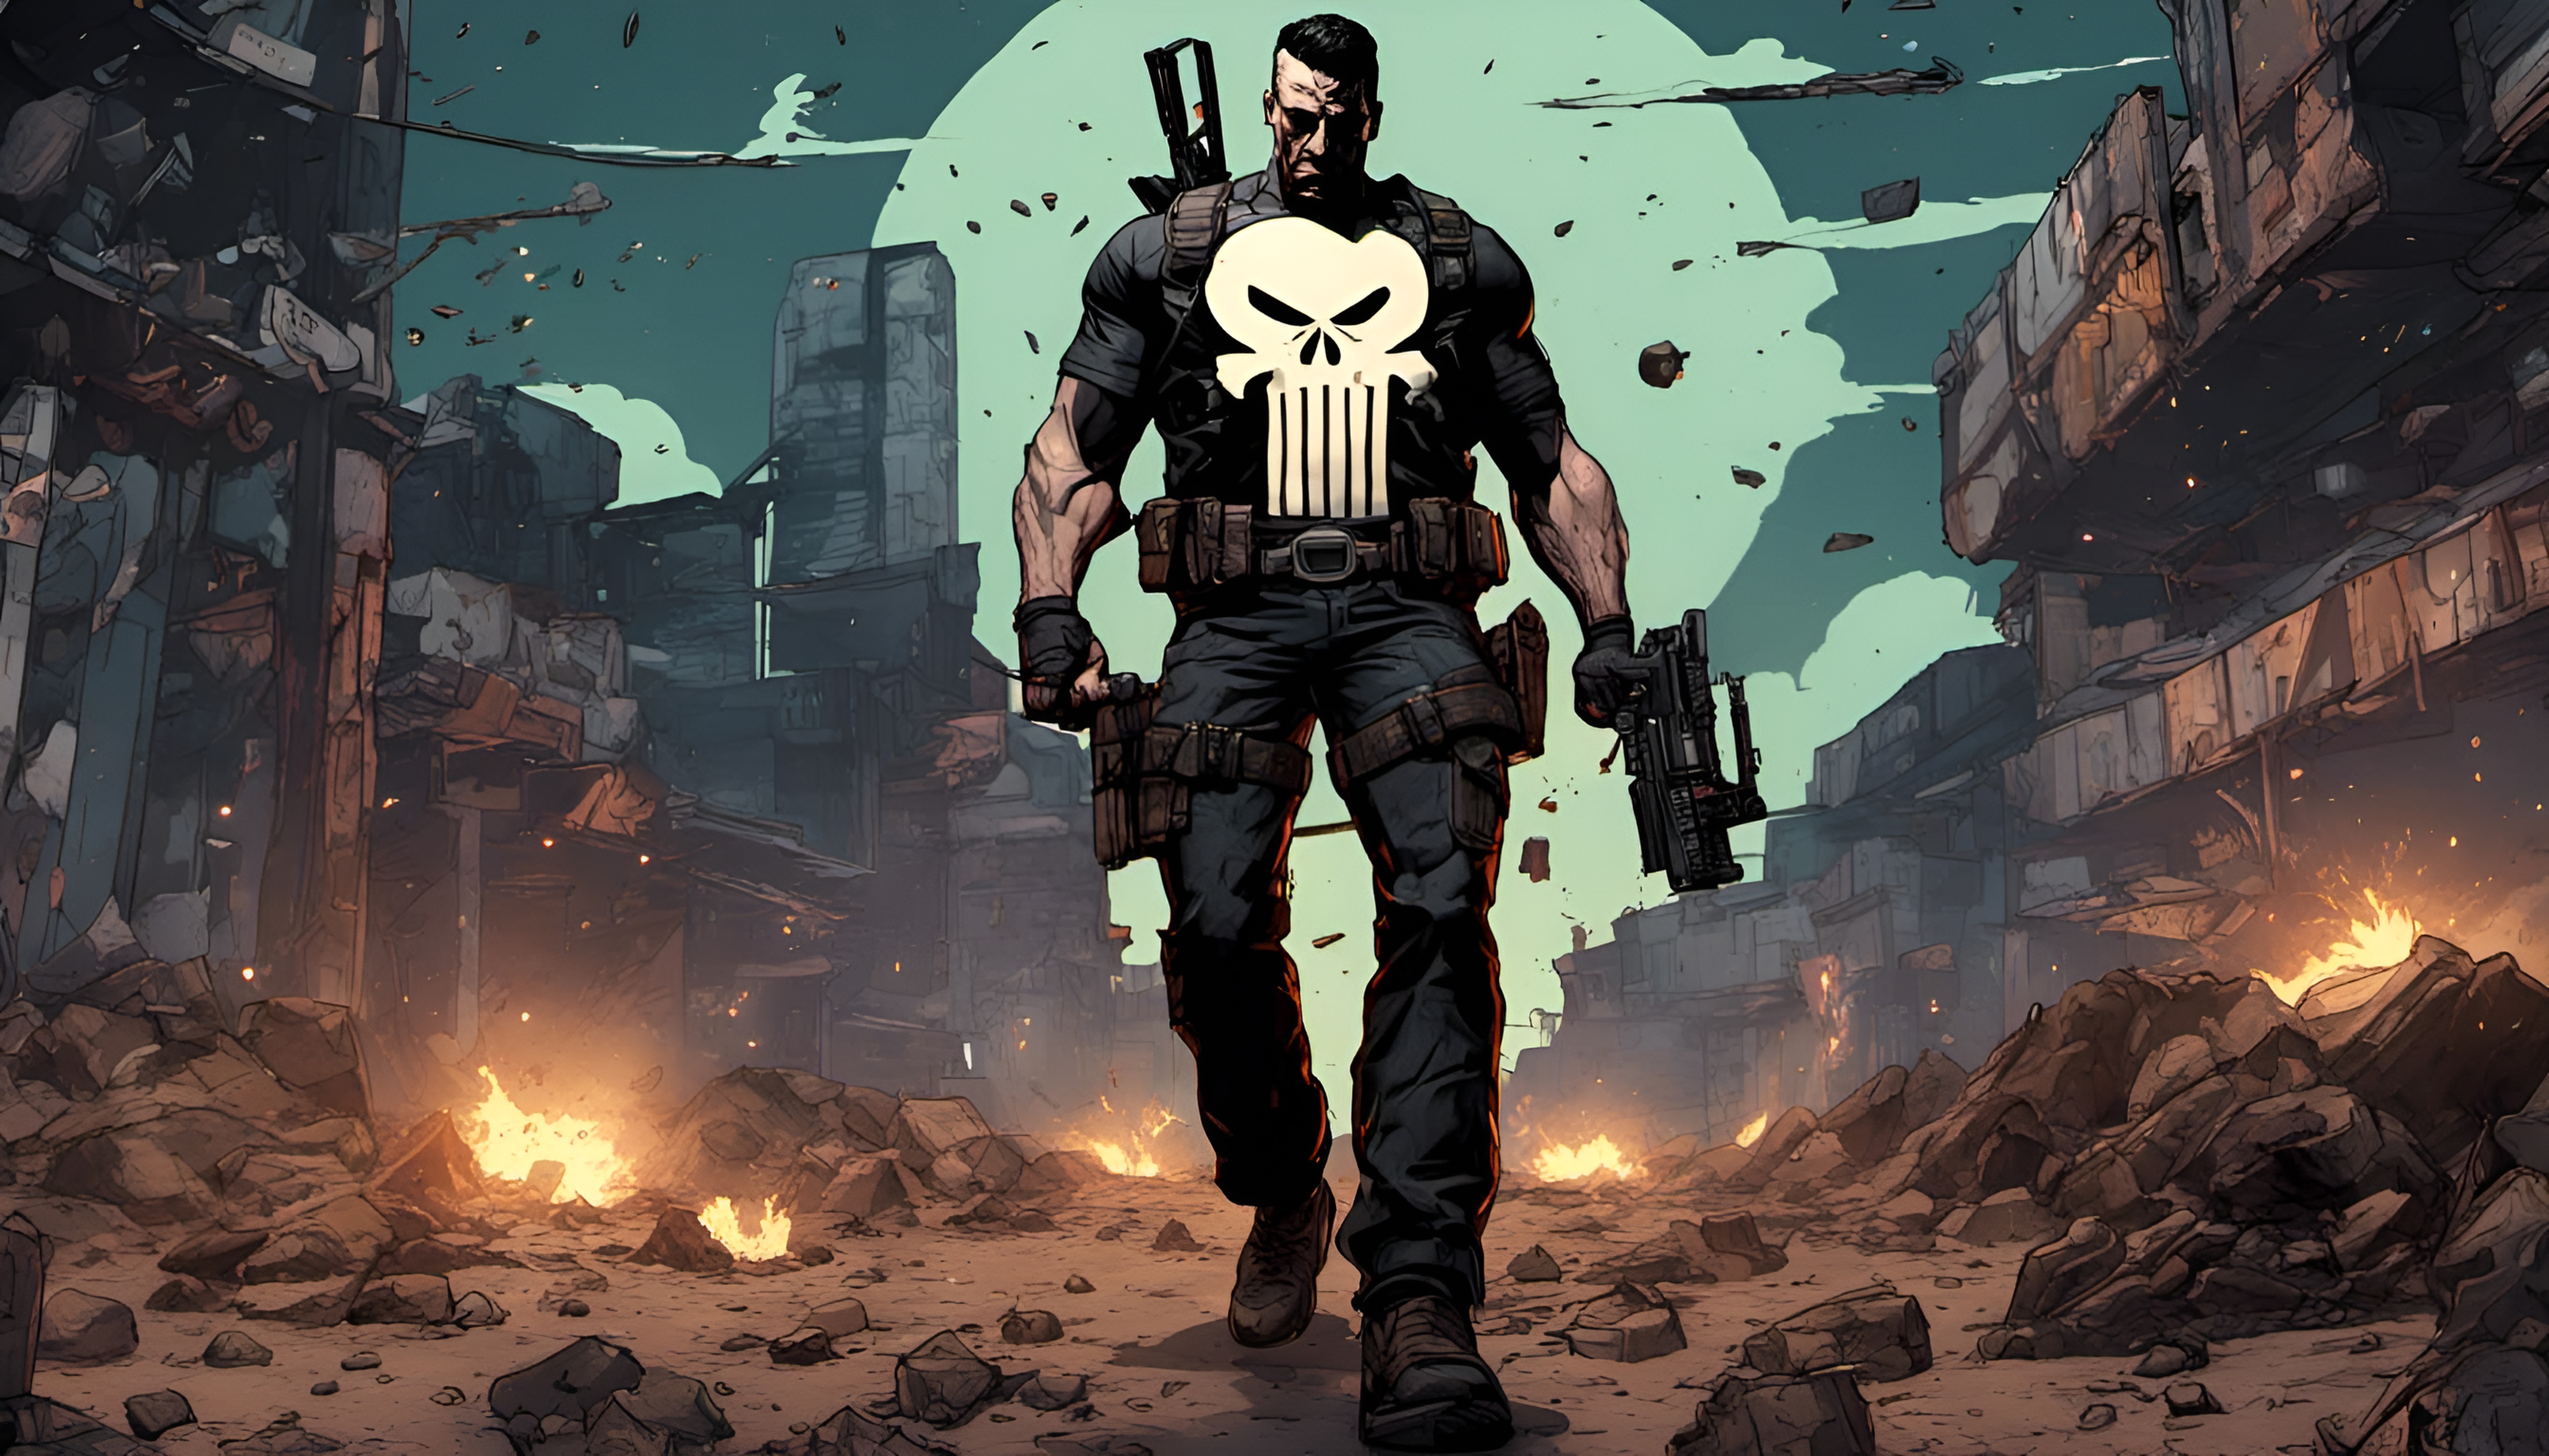 Marvel's The Punisher Wallpapers - Wallpaper Cave